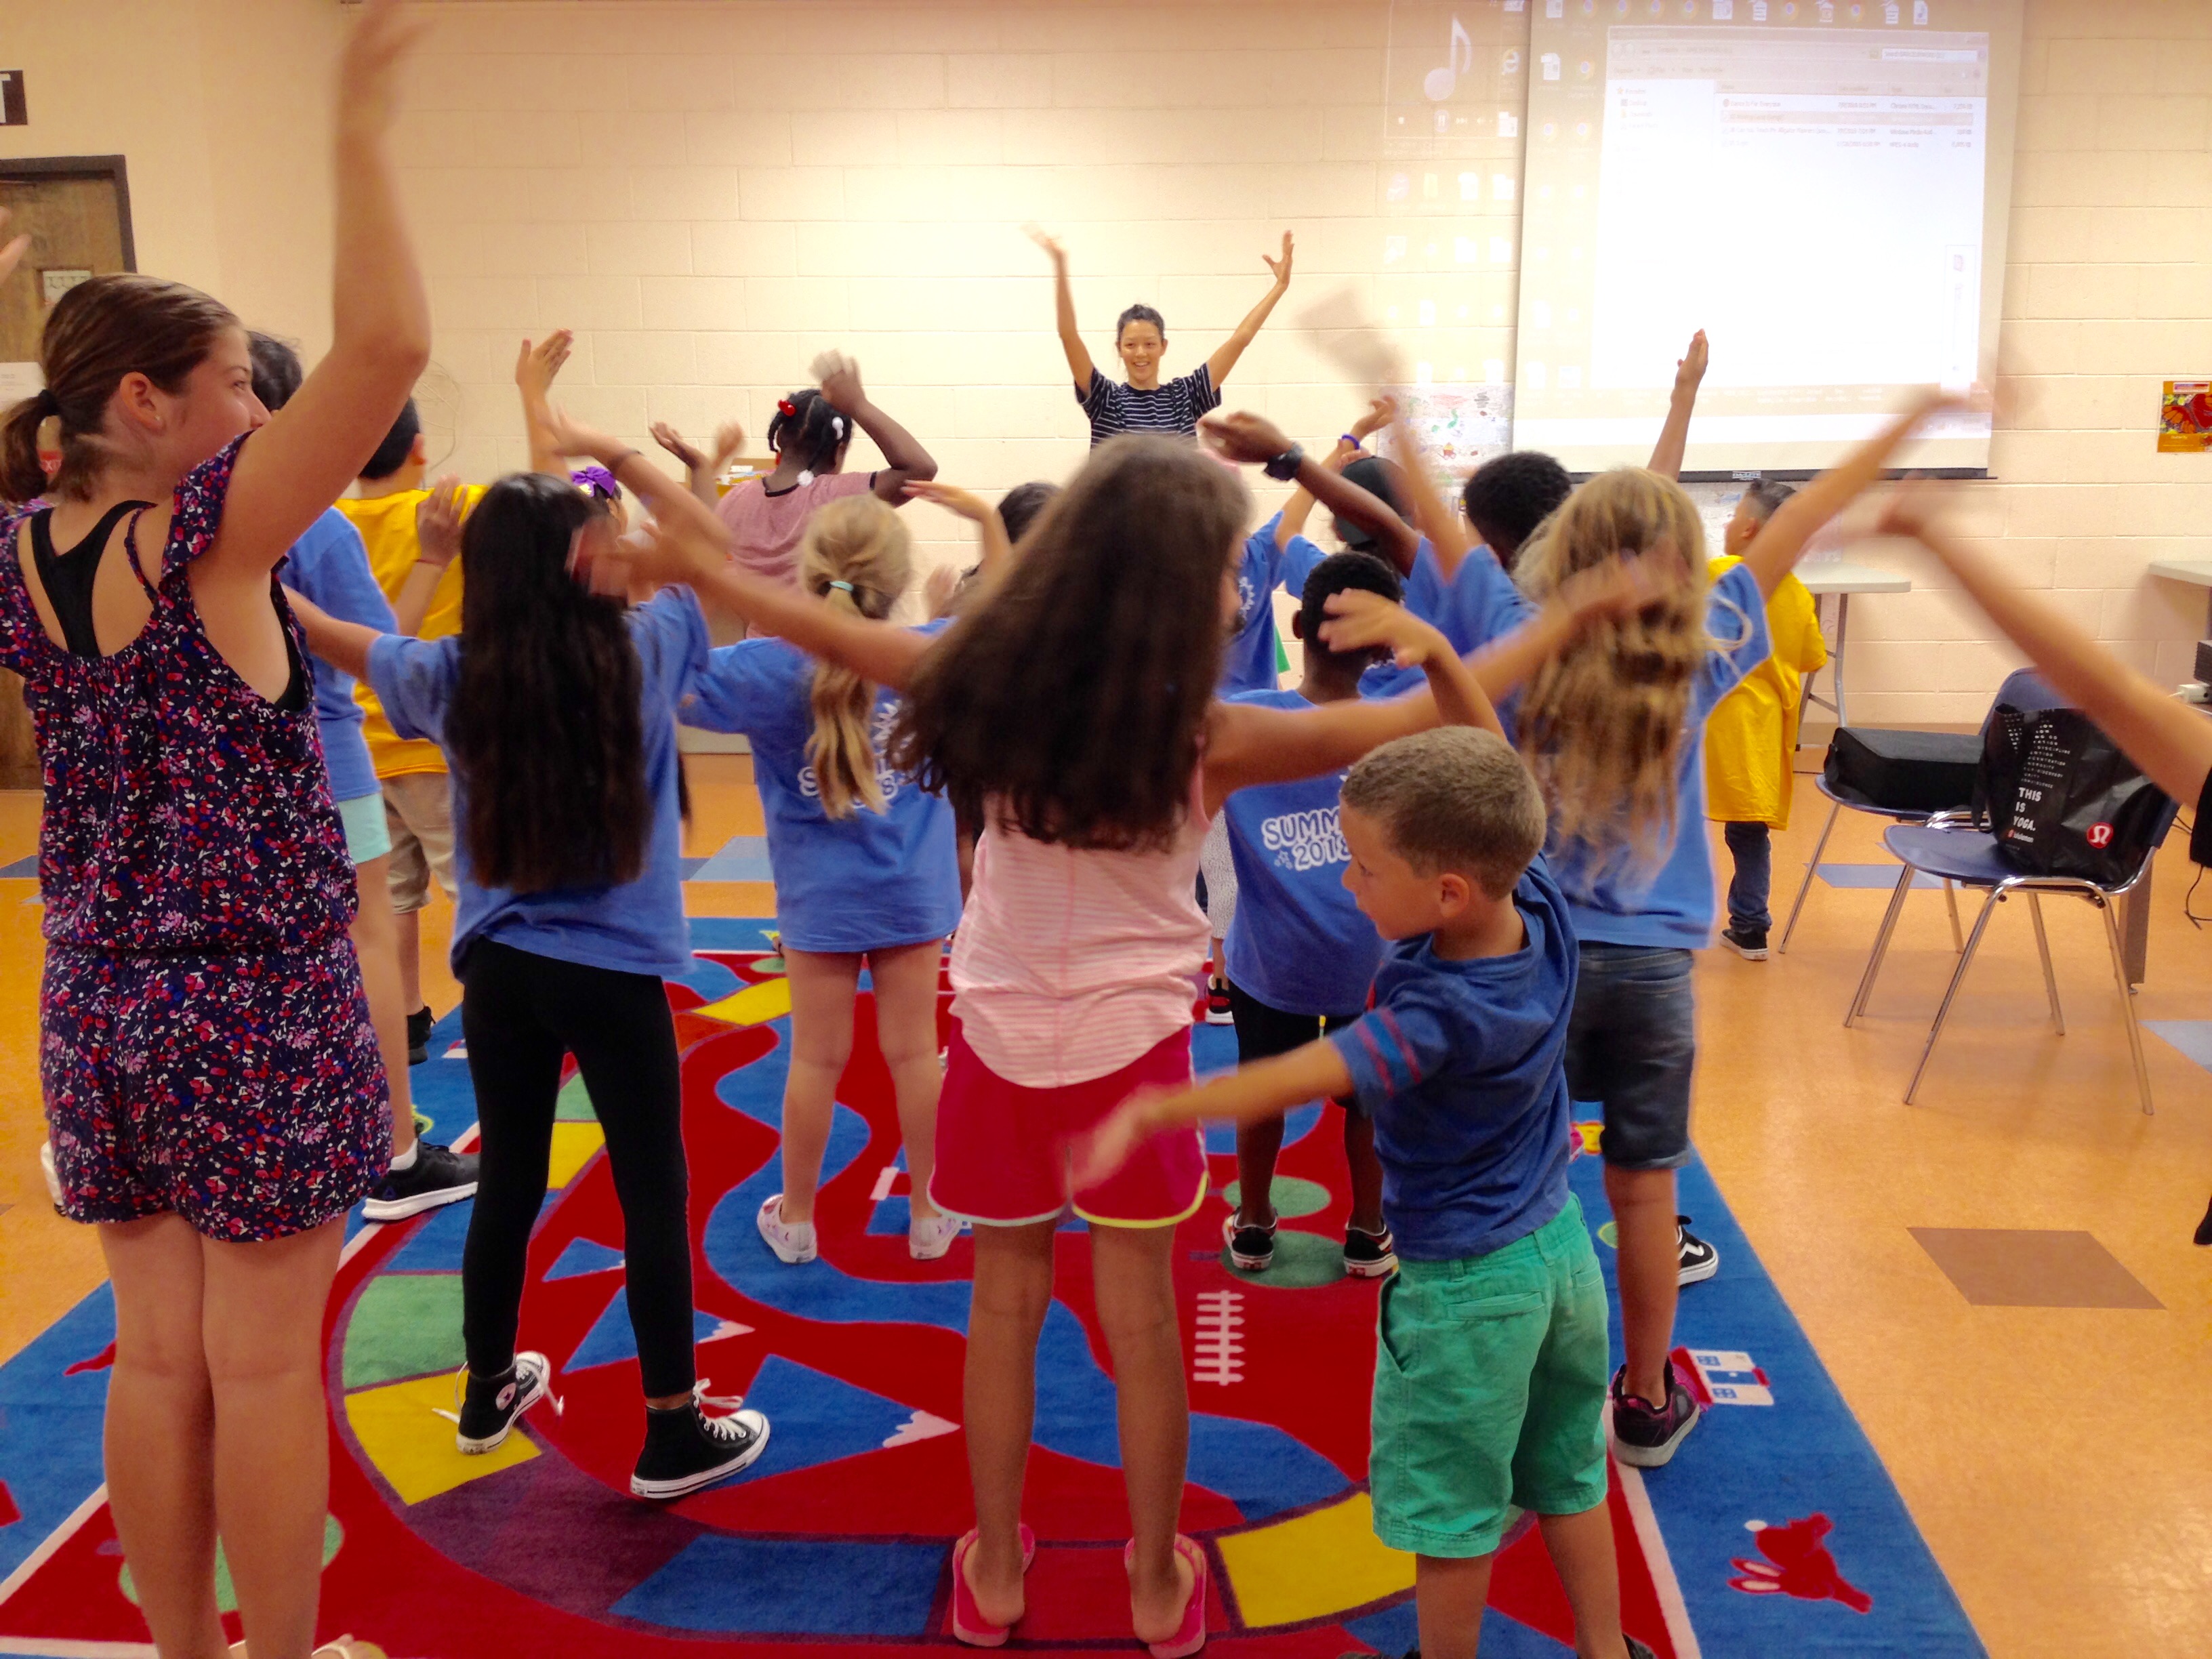 The children start “Dance Your Words” workshop with a warm-up exercise.